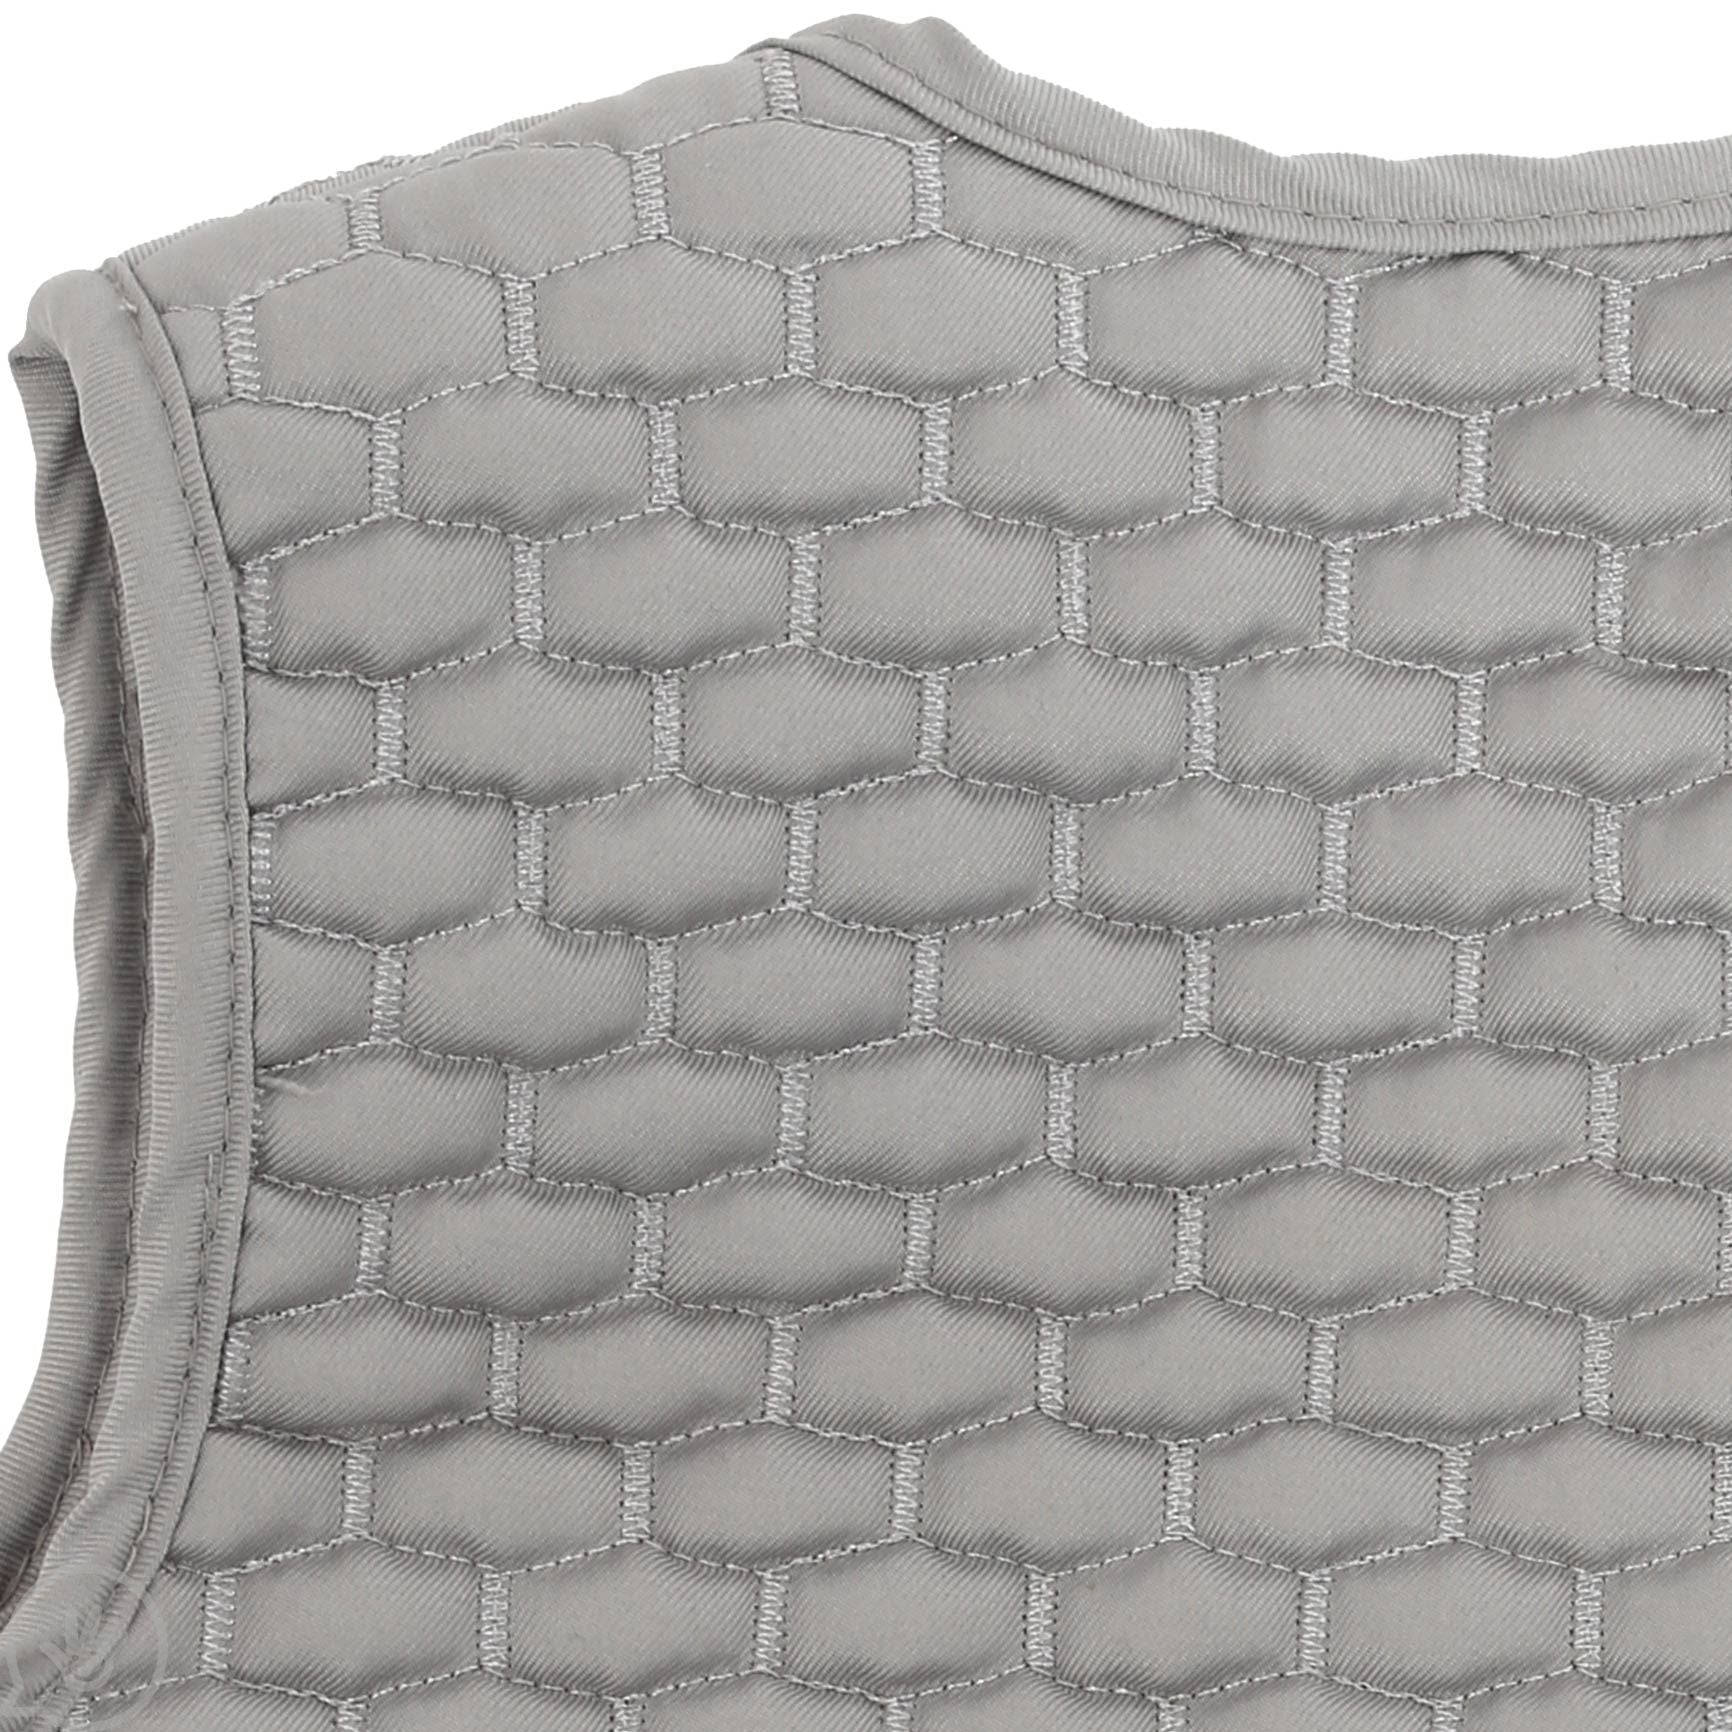 A close up of the texture of the Kids Honeycomb Weighted Vest.